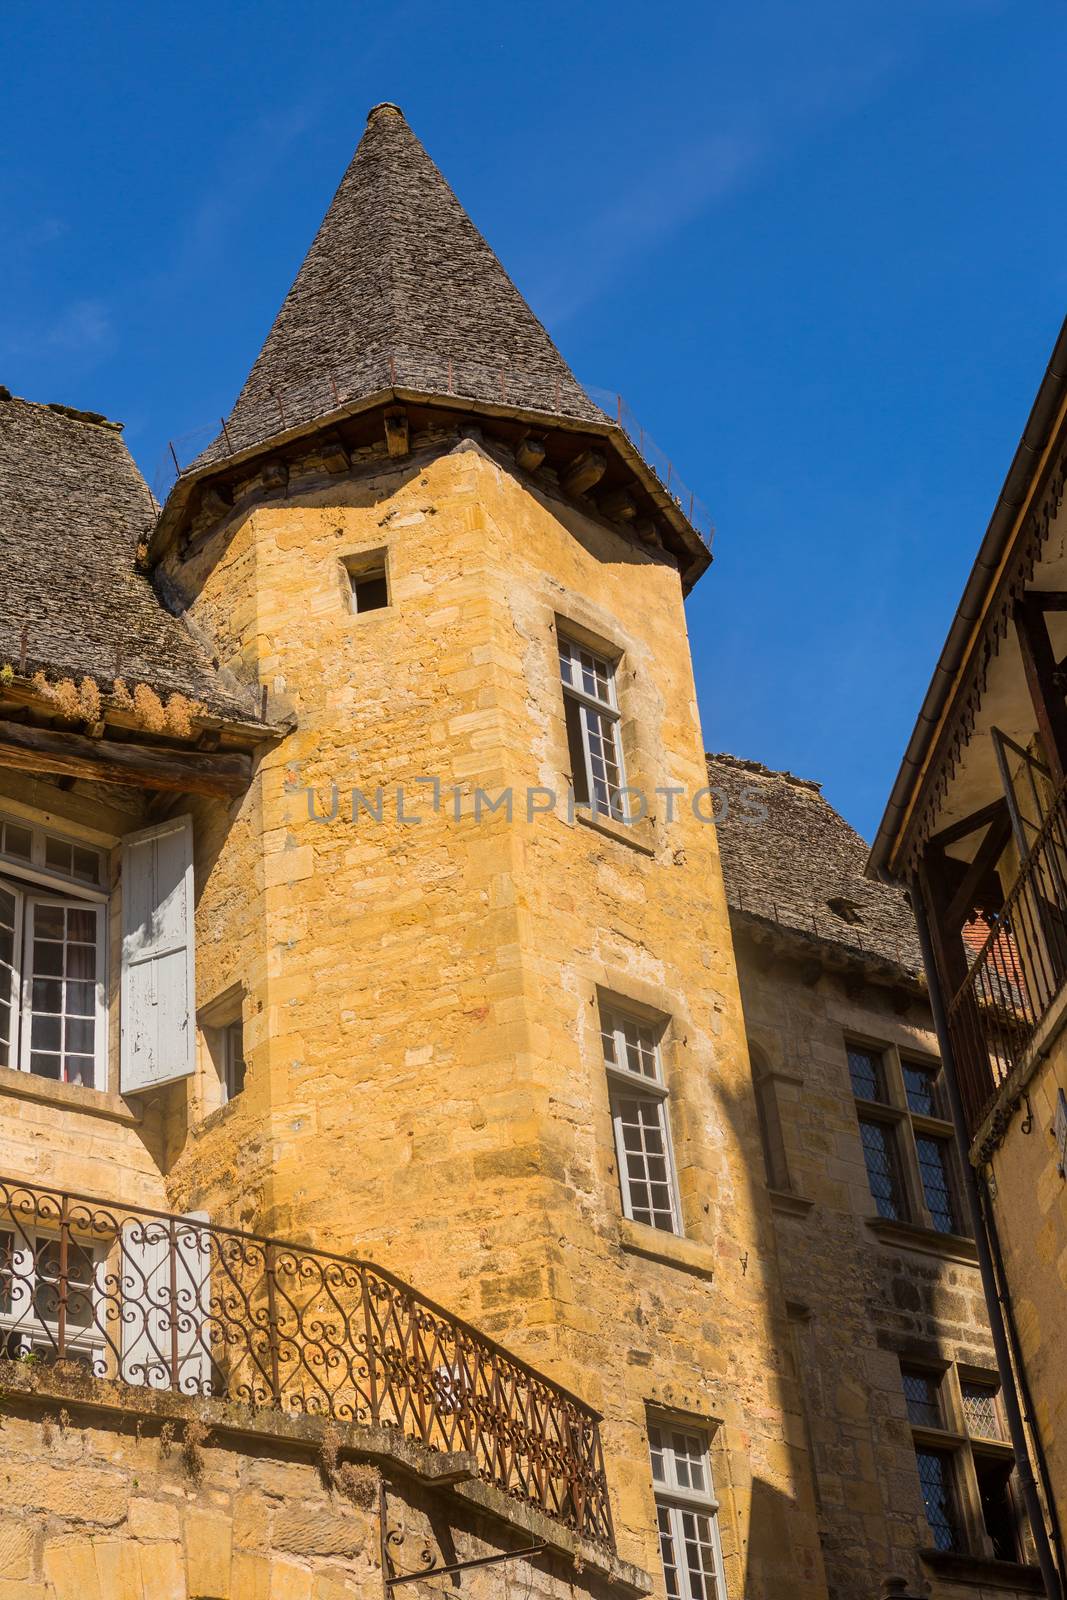 Sarlat-la-Caneda, France: Houses of the centre of the old medieval town of Sarlat-la-Caneda, Dordogne, France.